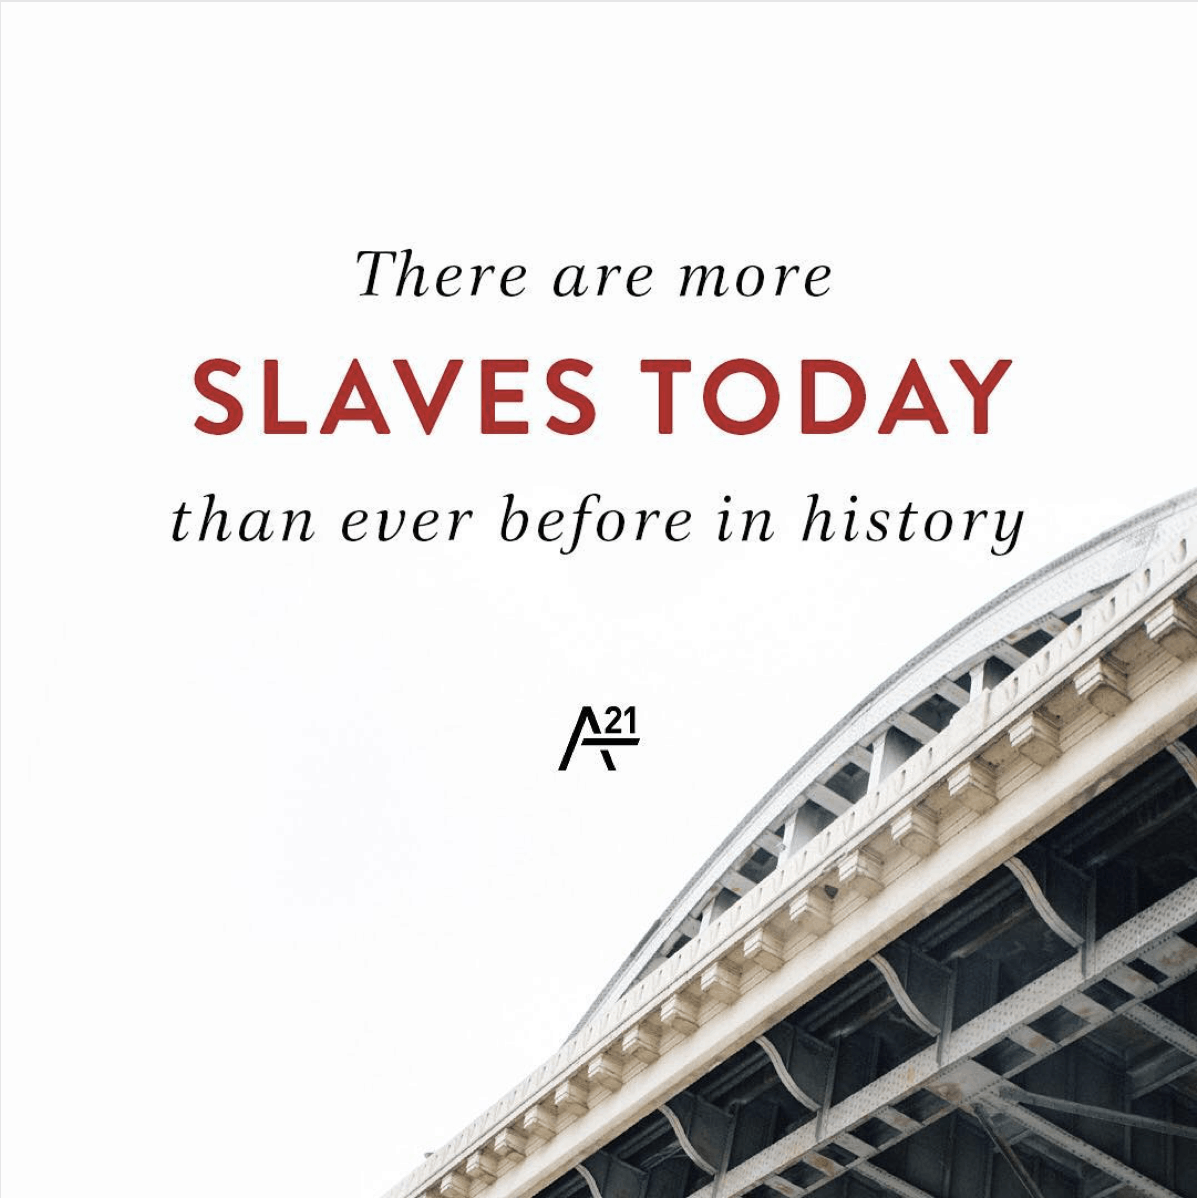 There are more slaves today than ever before in human history